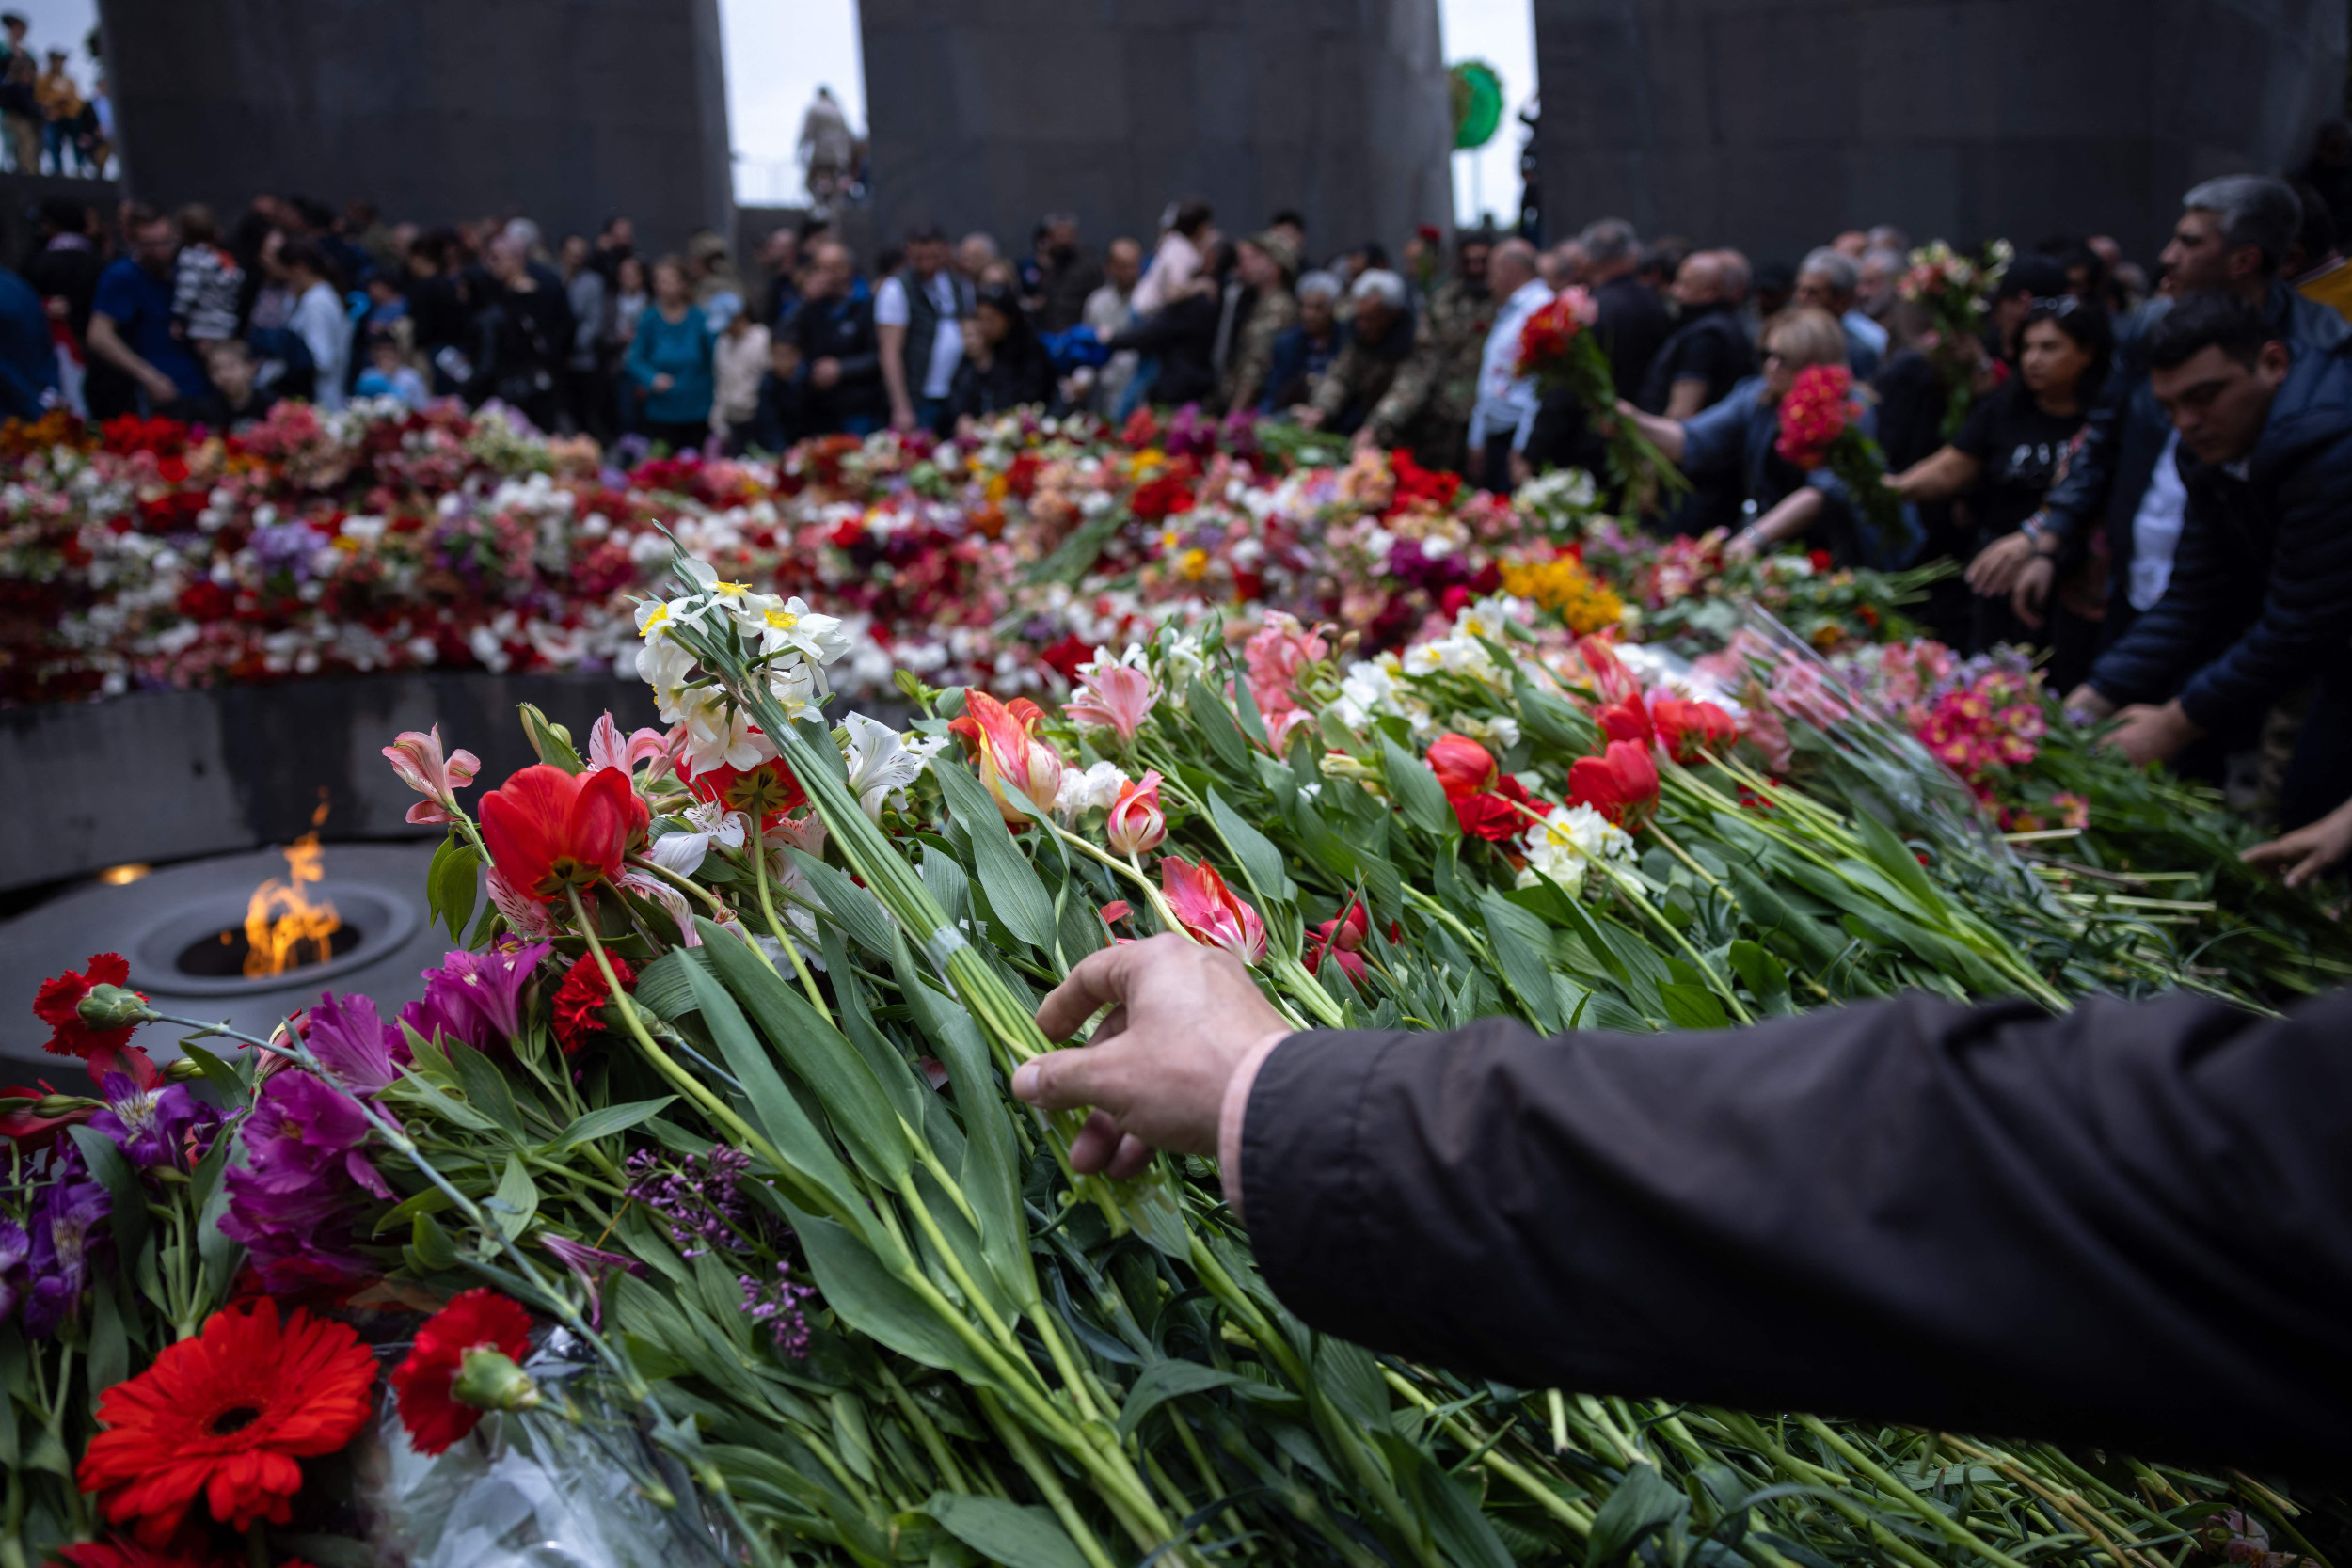 Forget About Turkey's Angry Reaction-International Norms of Armenian Genocide Recognition Clash With Nationalistic Memory | Opinion